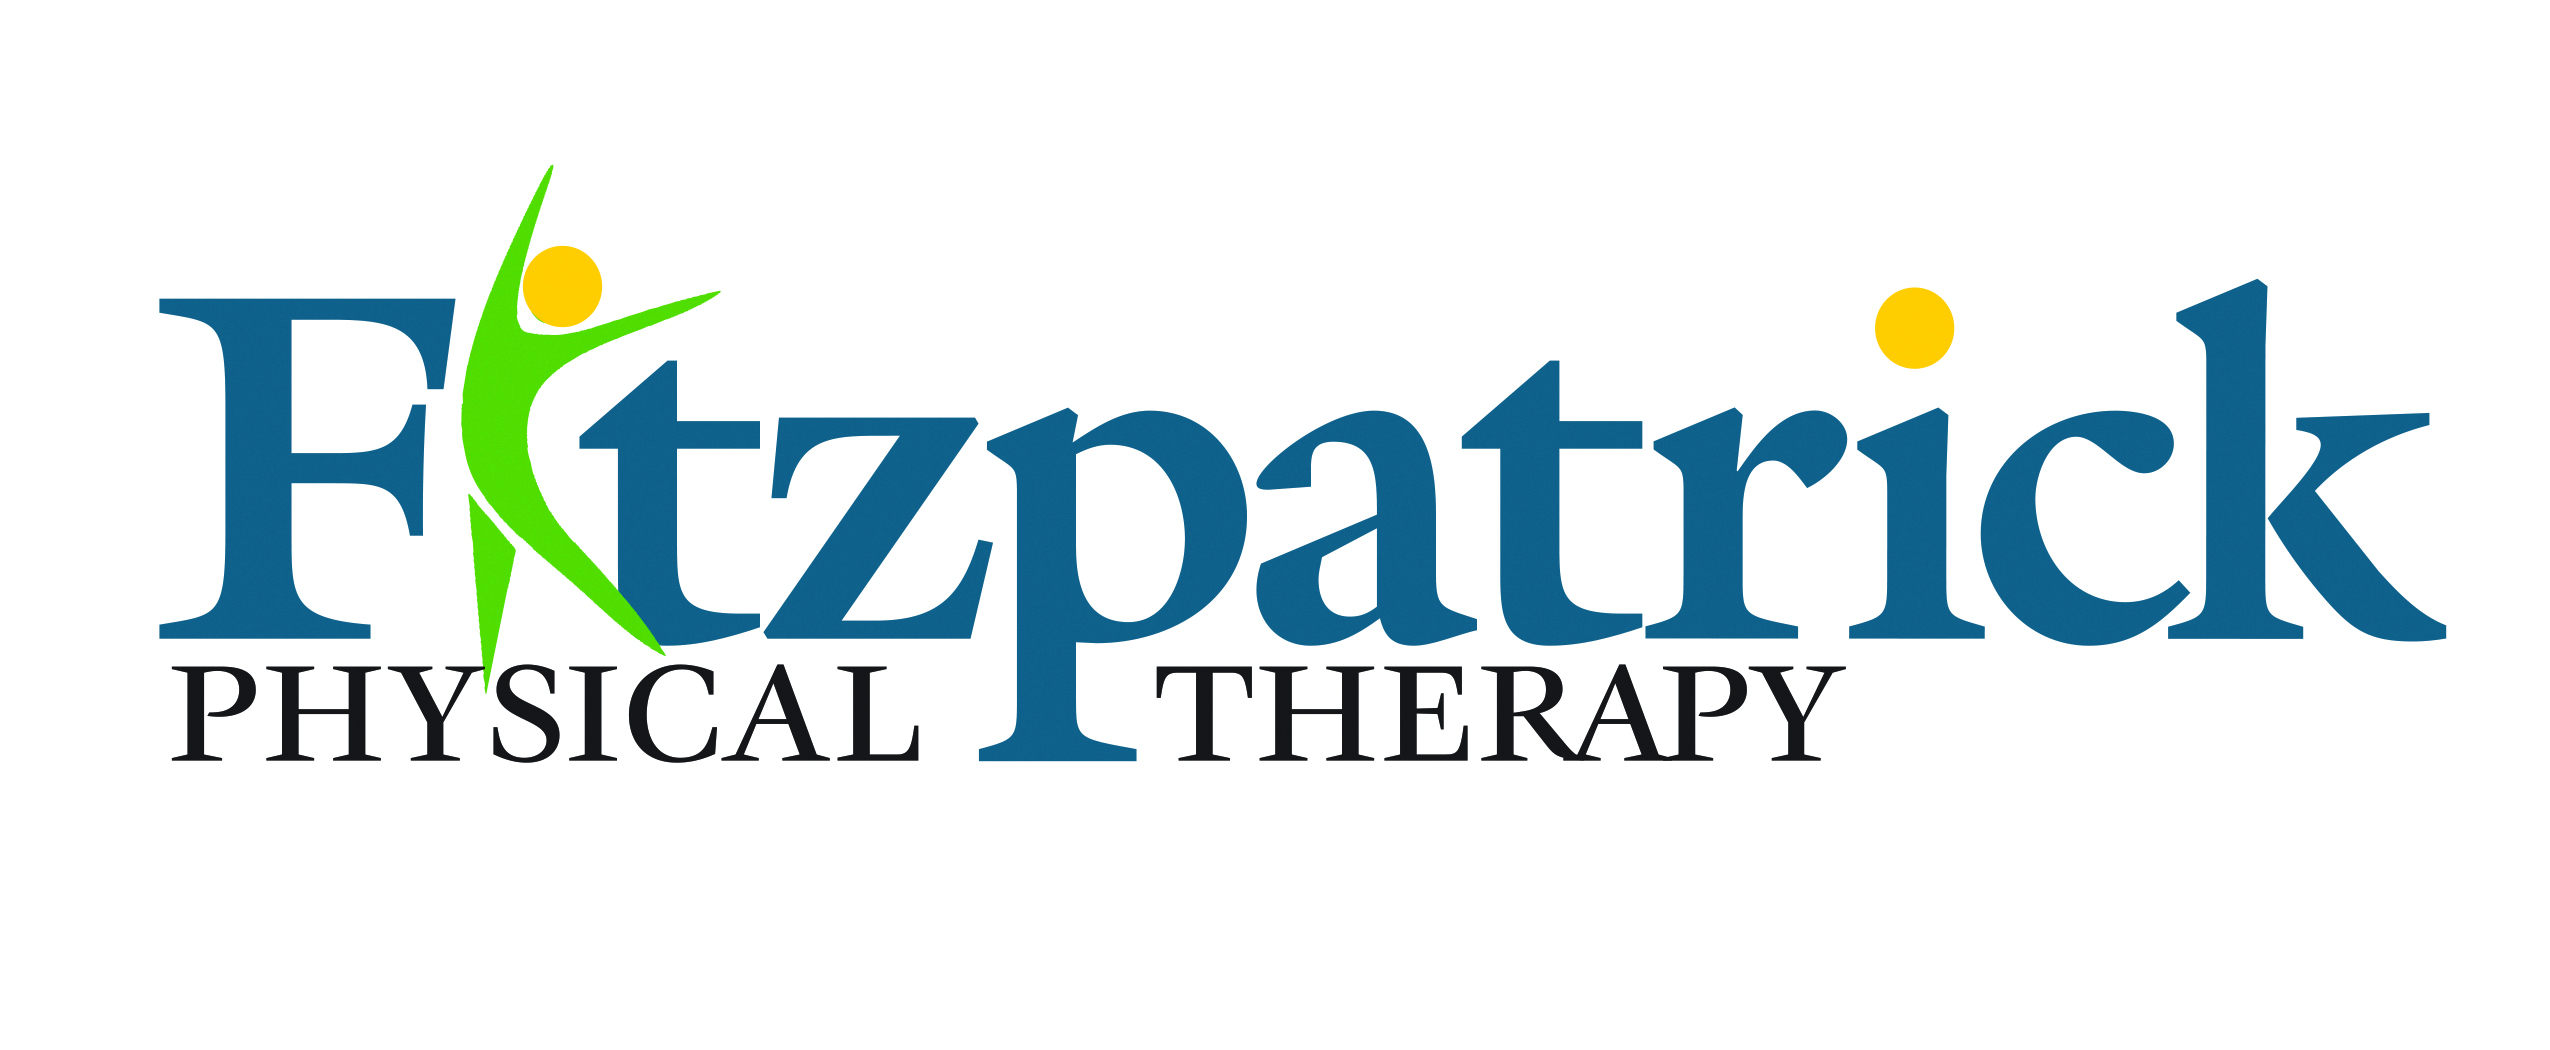 Fitzpatrick Physical Therapy